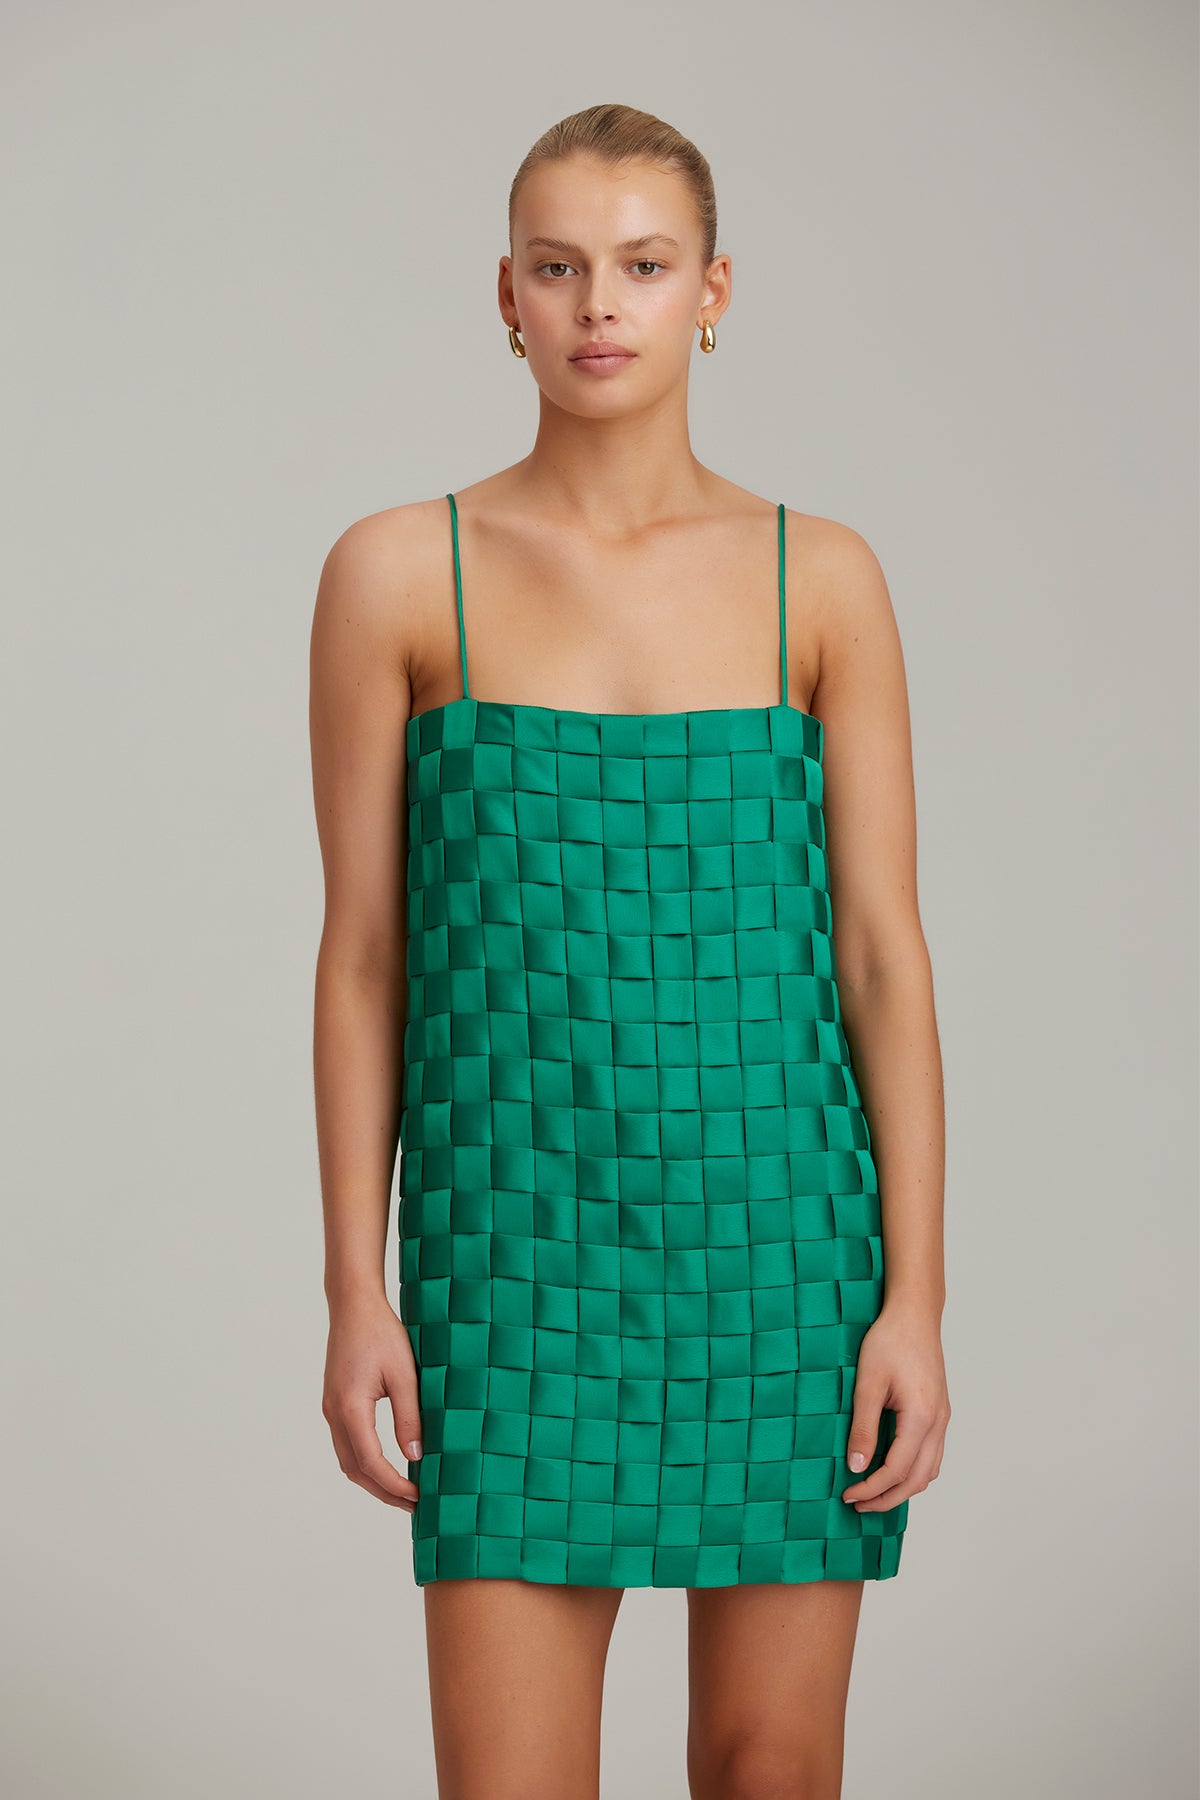 C/MEO Collective - Signals Dress - Forest Green